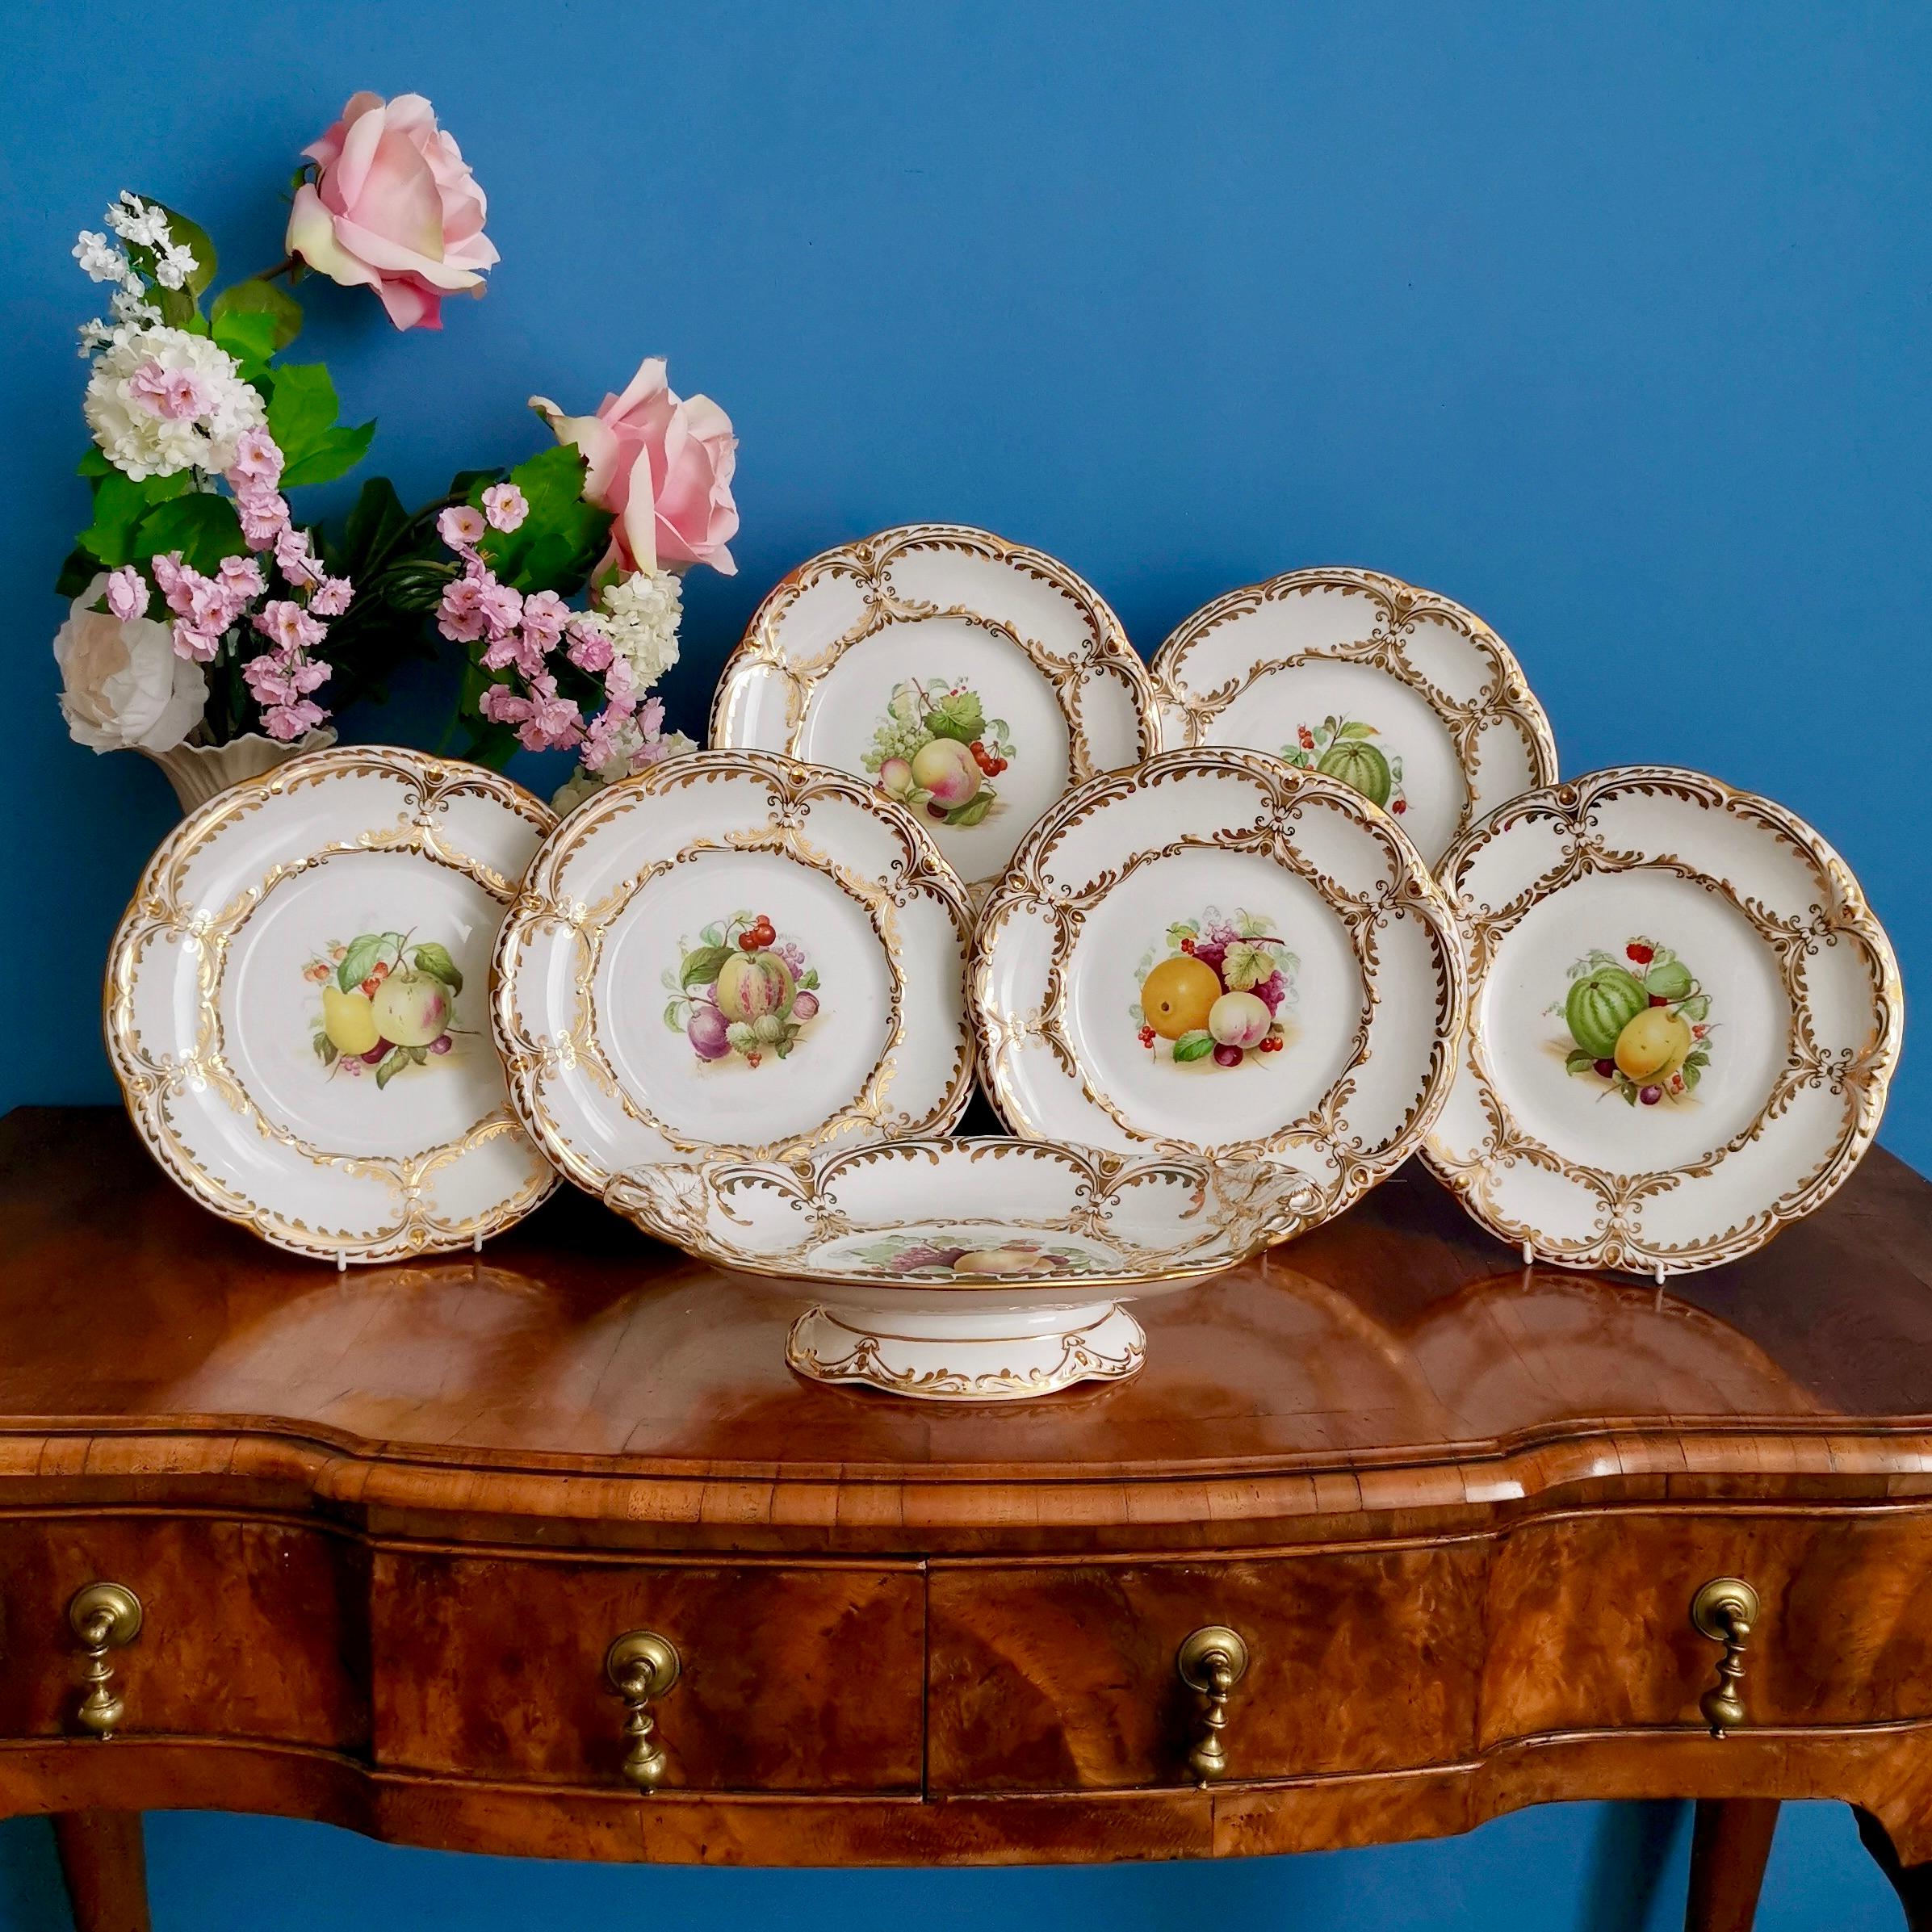 This is a beautiful part dessert service made by Davenport in 1869. It consists of an oval comport and six plates and is decorated with beautiful hand painted fruits.

Davenport was one of the pioneers of English china production alongside other